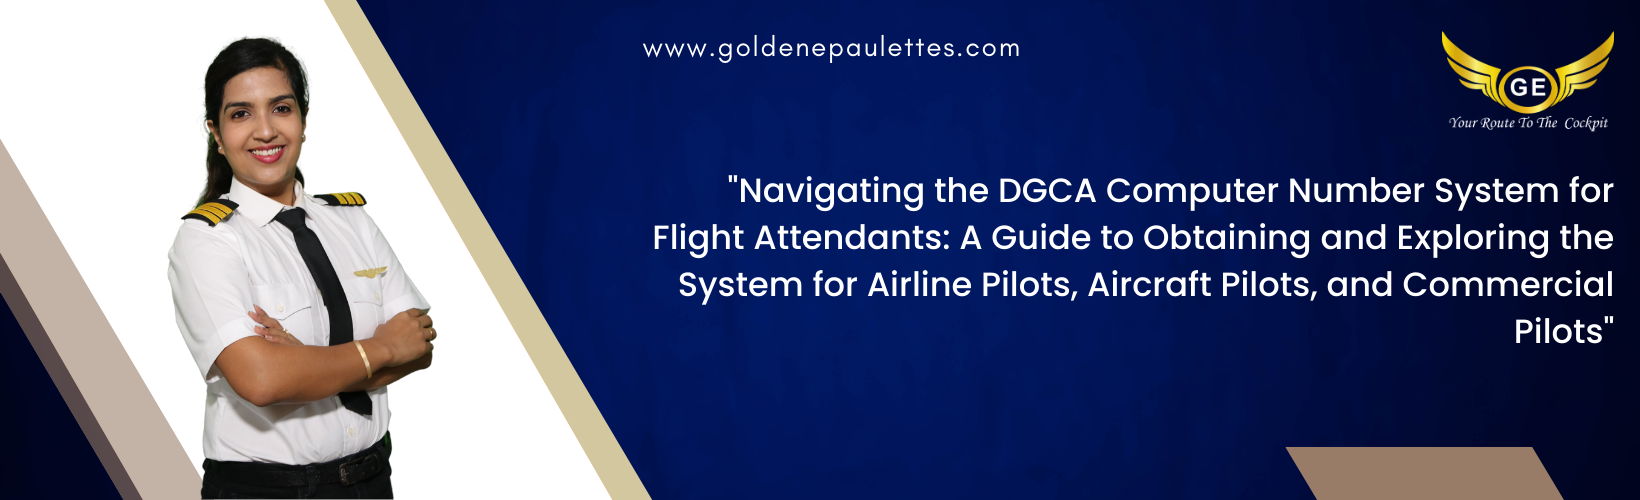 Navigating the DGCA Computer Number System for Flight Attendants